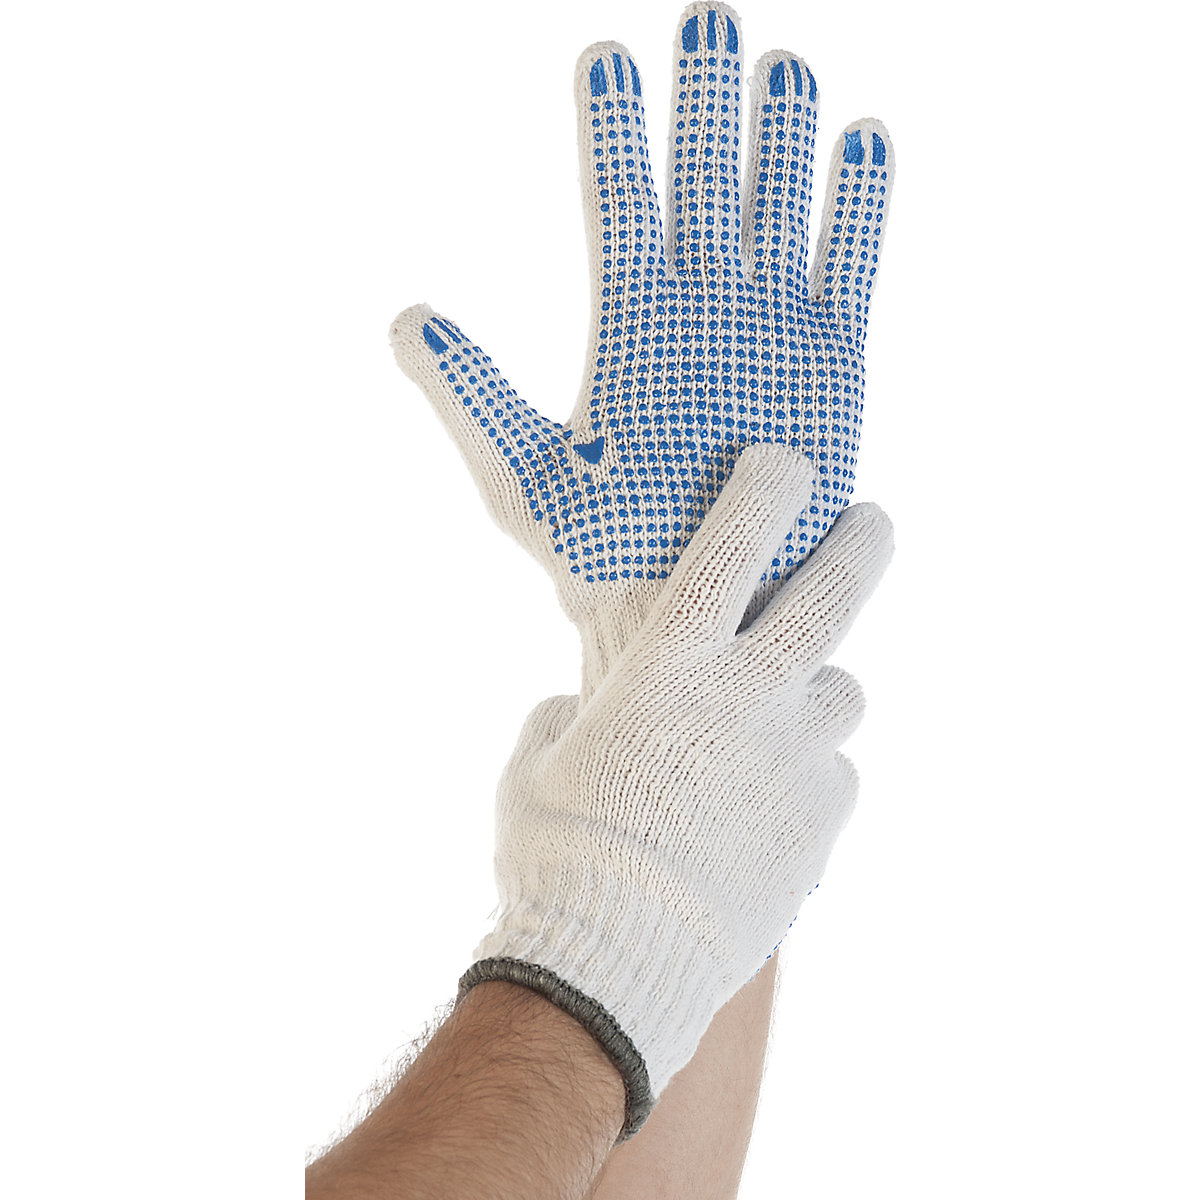 STRUCTA I cotton-polyester knitted gloves